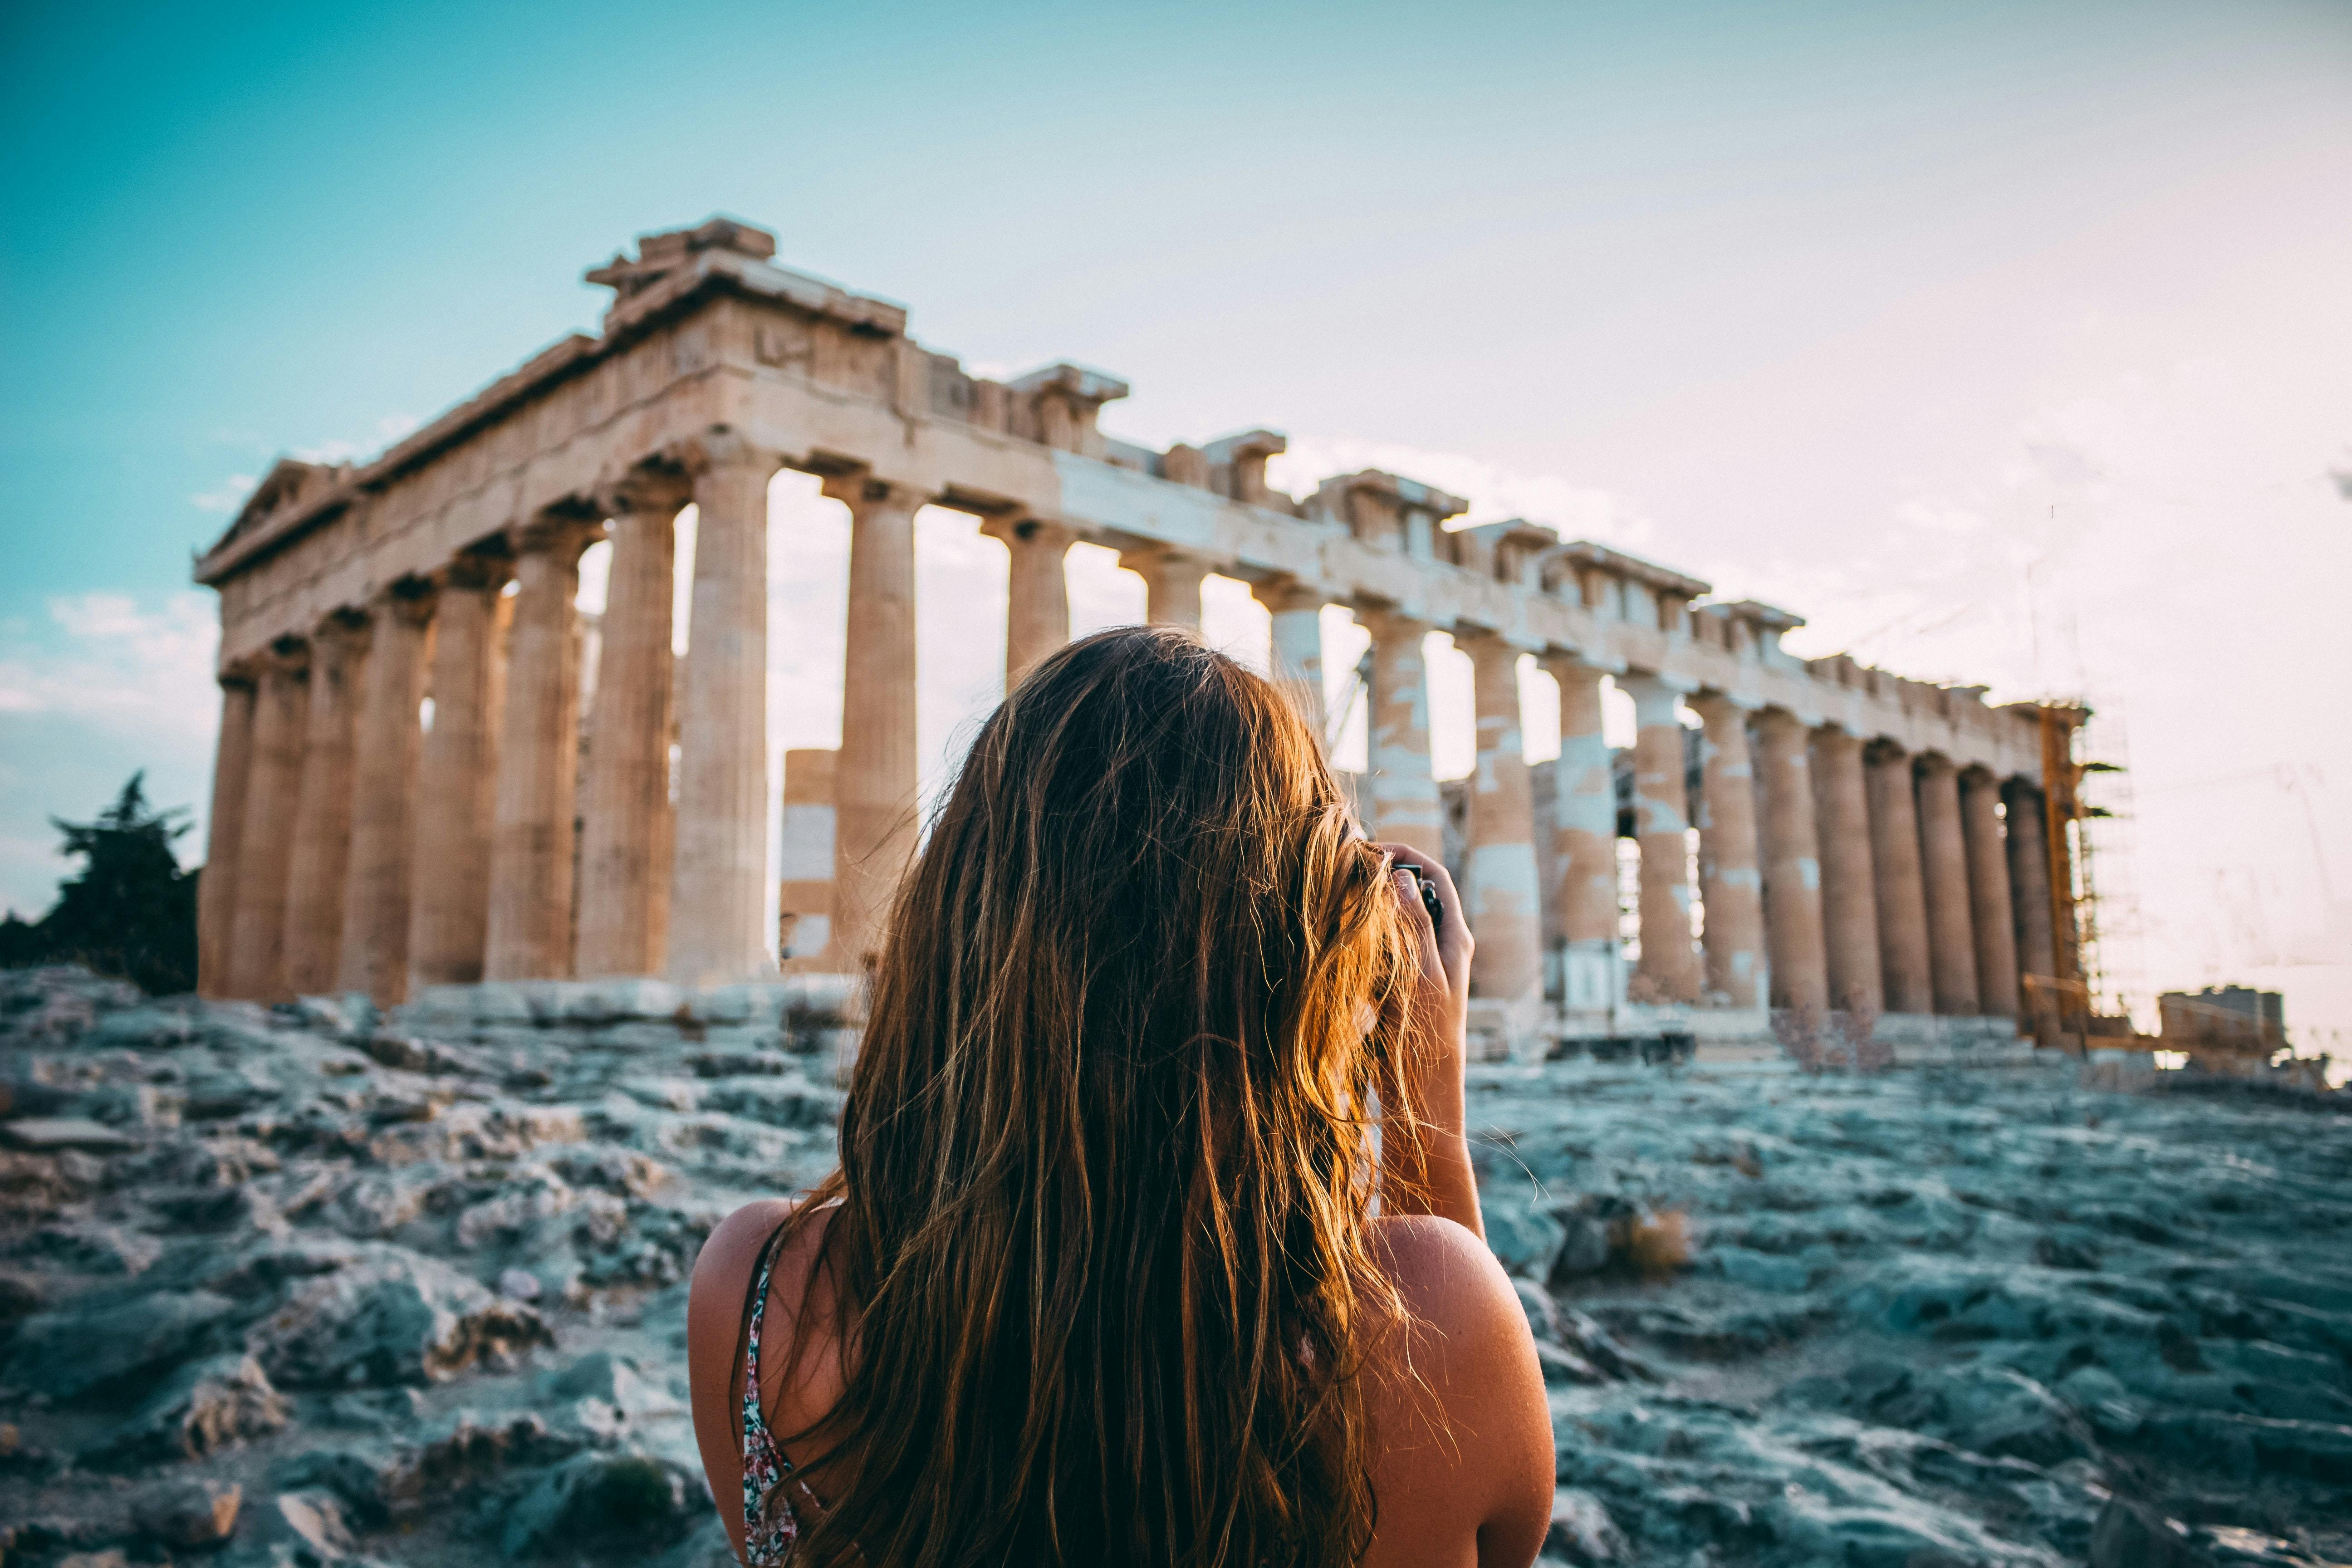 Athens Instagram photo experience with a private local Musement